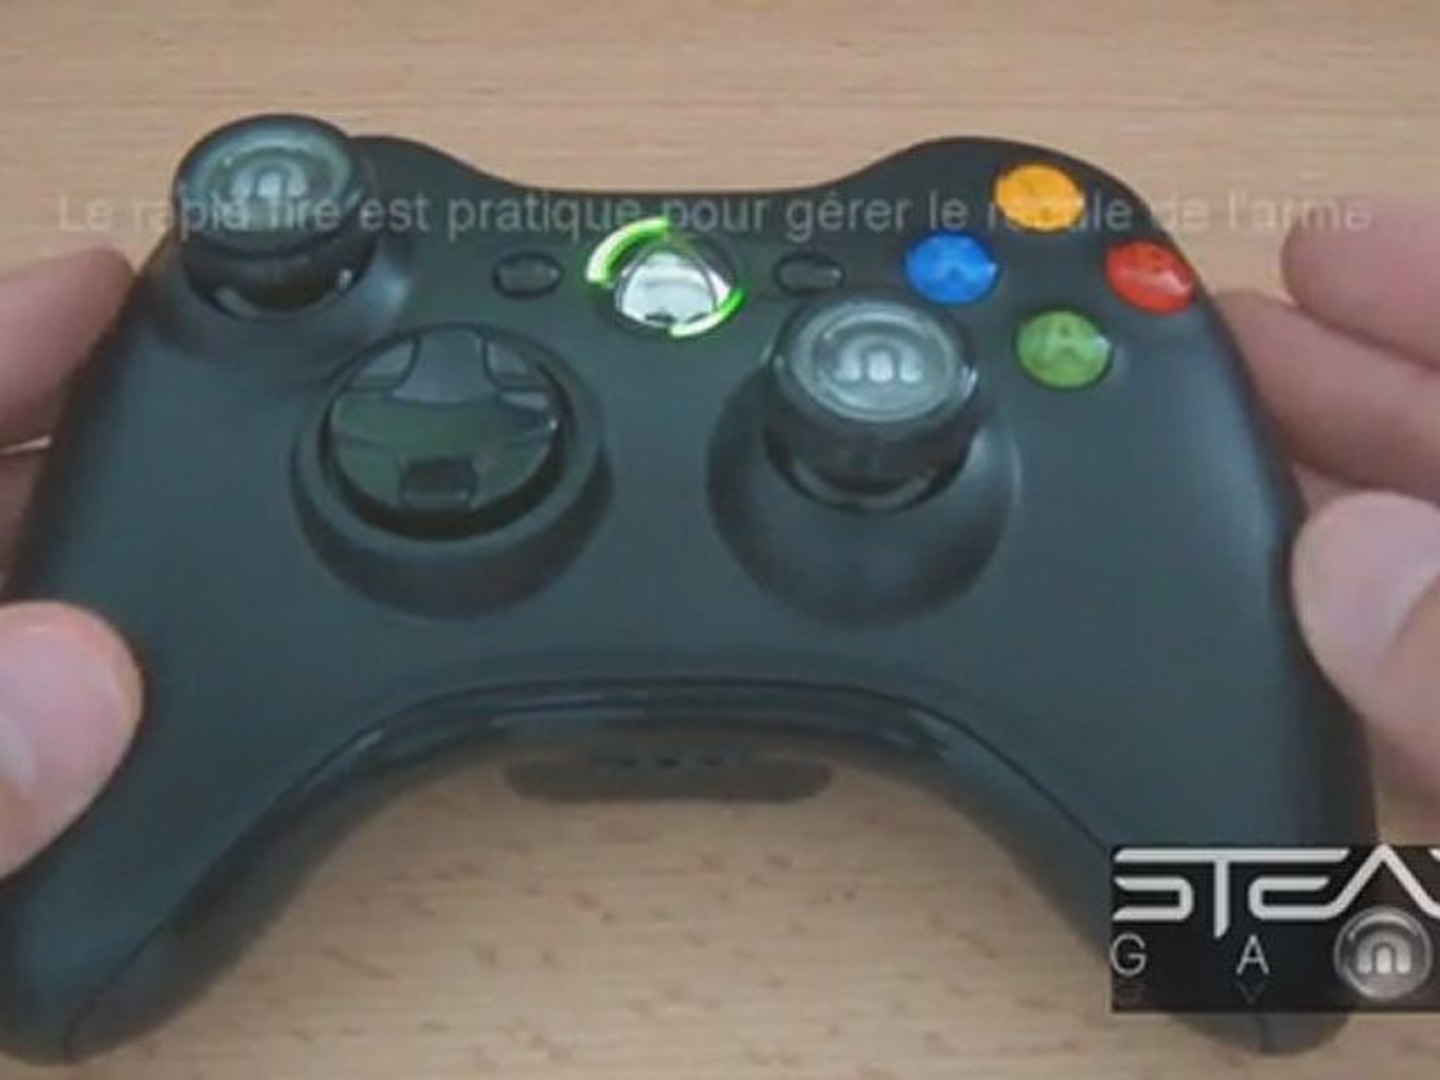 Manette Xbox 360 Rapid Fire 13 modes - Drop Shot, Jitter, Quick Scope -  www.stealth-gamer.com - Manette pour Call of Duty, Gears Of War, Halo,  Battlefield etc... - Vidéo Dailymotion